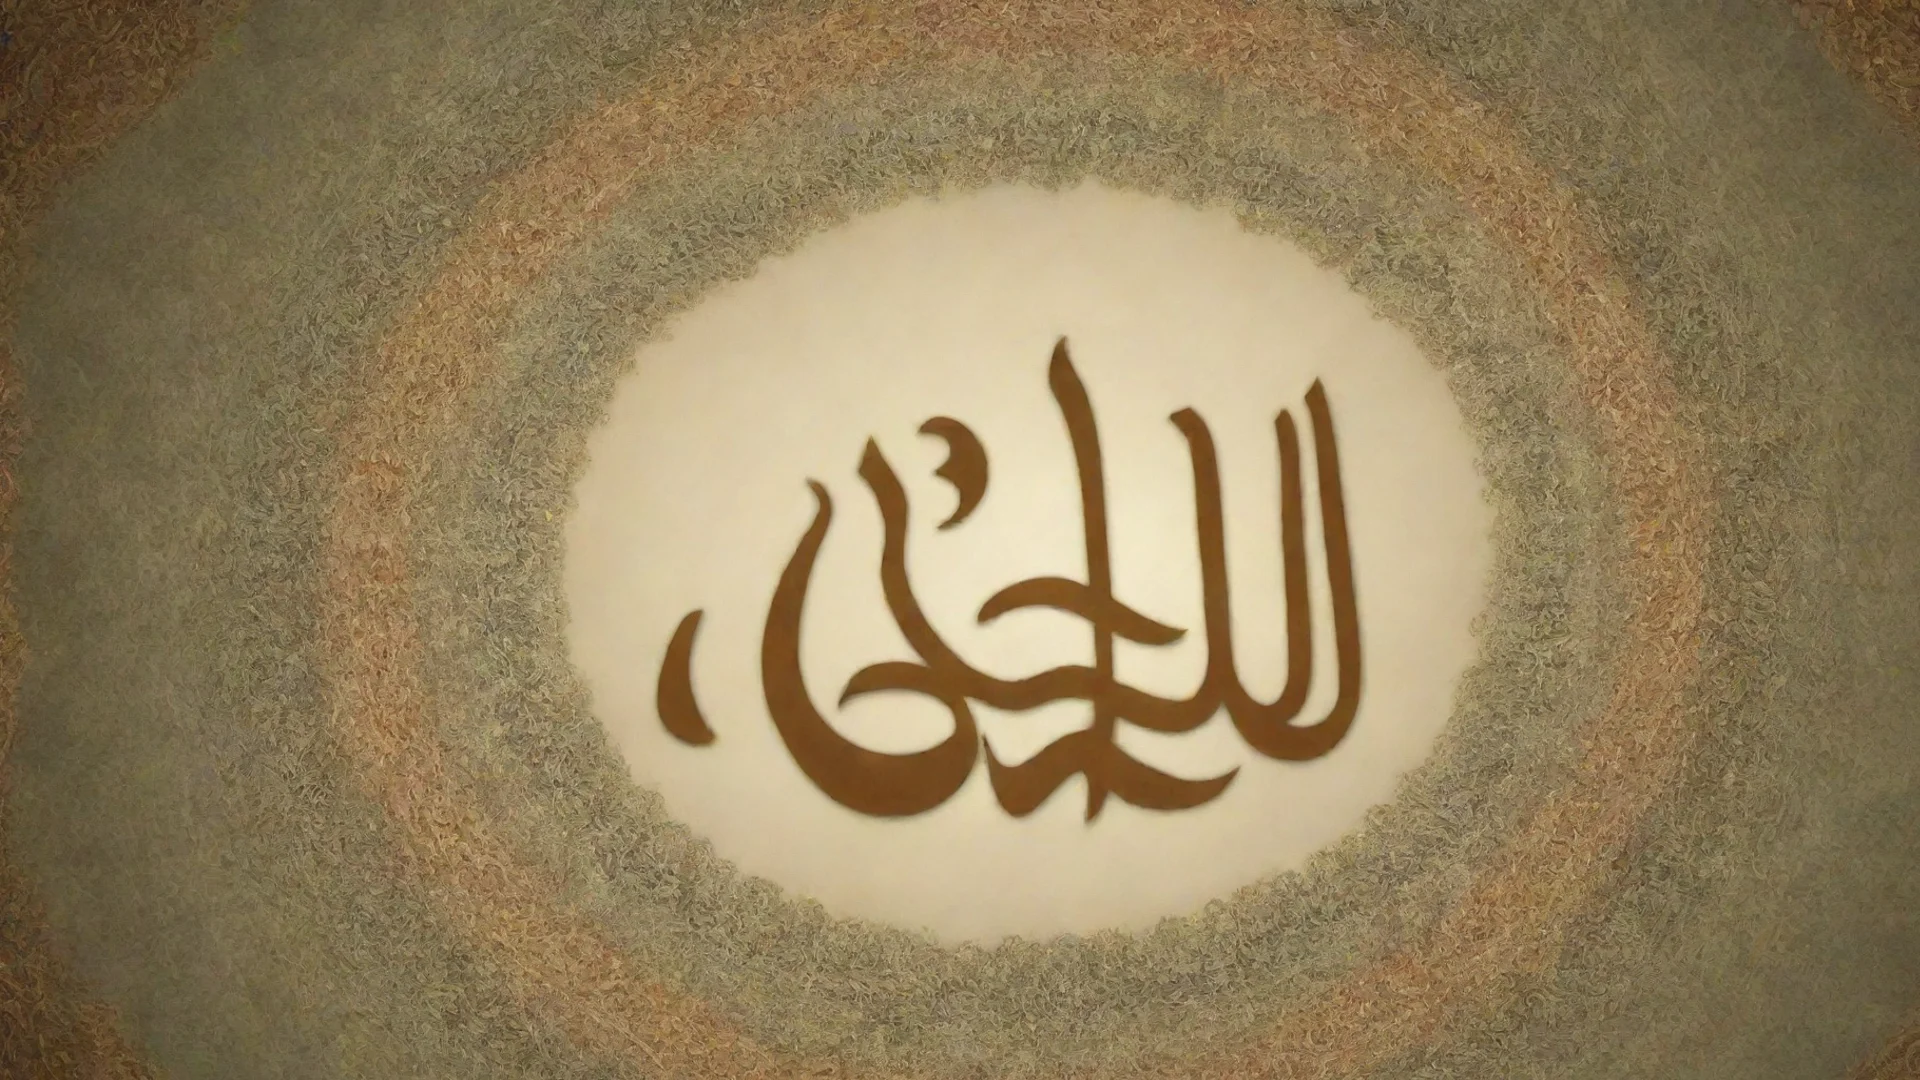 amazing allah name image  awesome portrait 2 wide